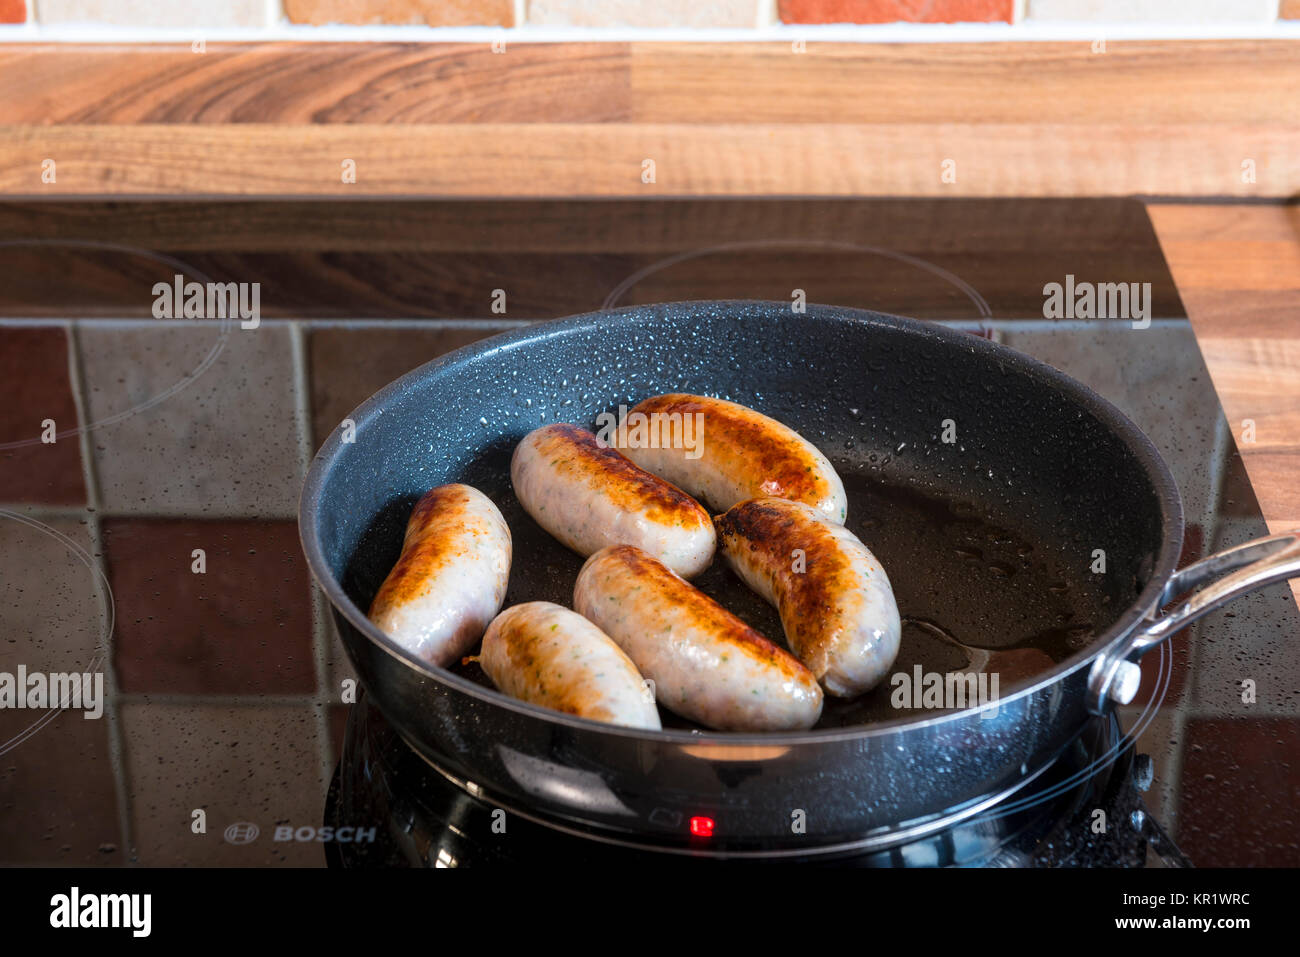 Sausages cooking in a frying pan on an induction hob. Stock Photo